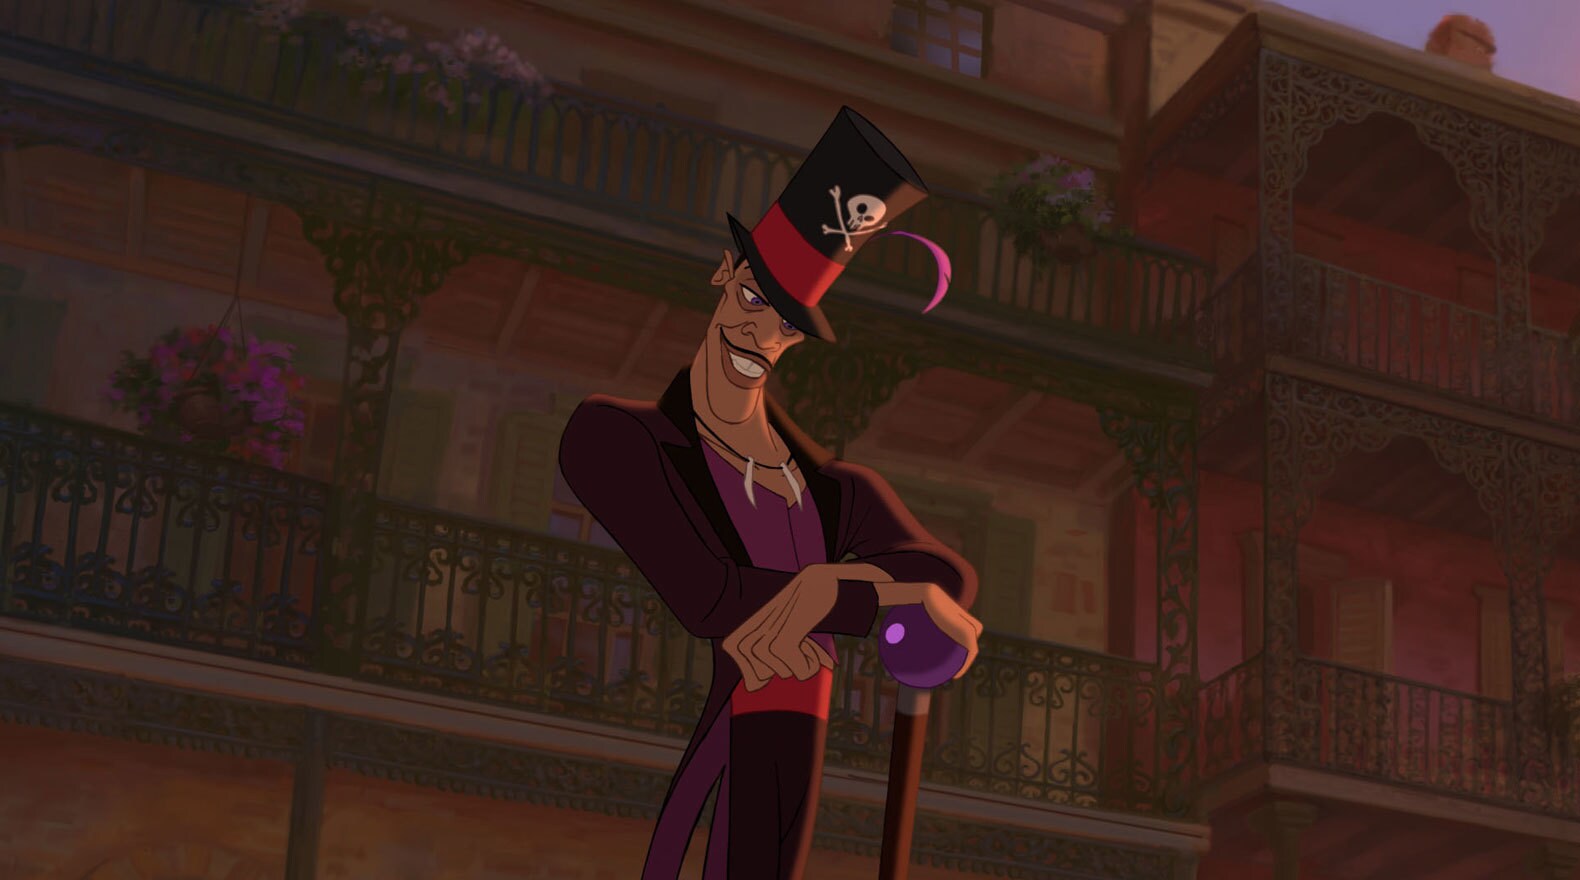 Dr. Facilier voiced by Keith David in the princess and the frog